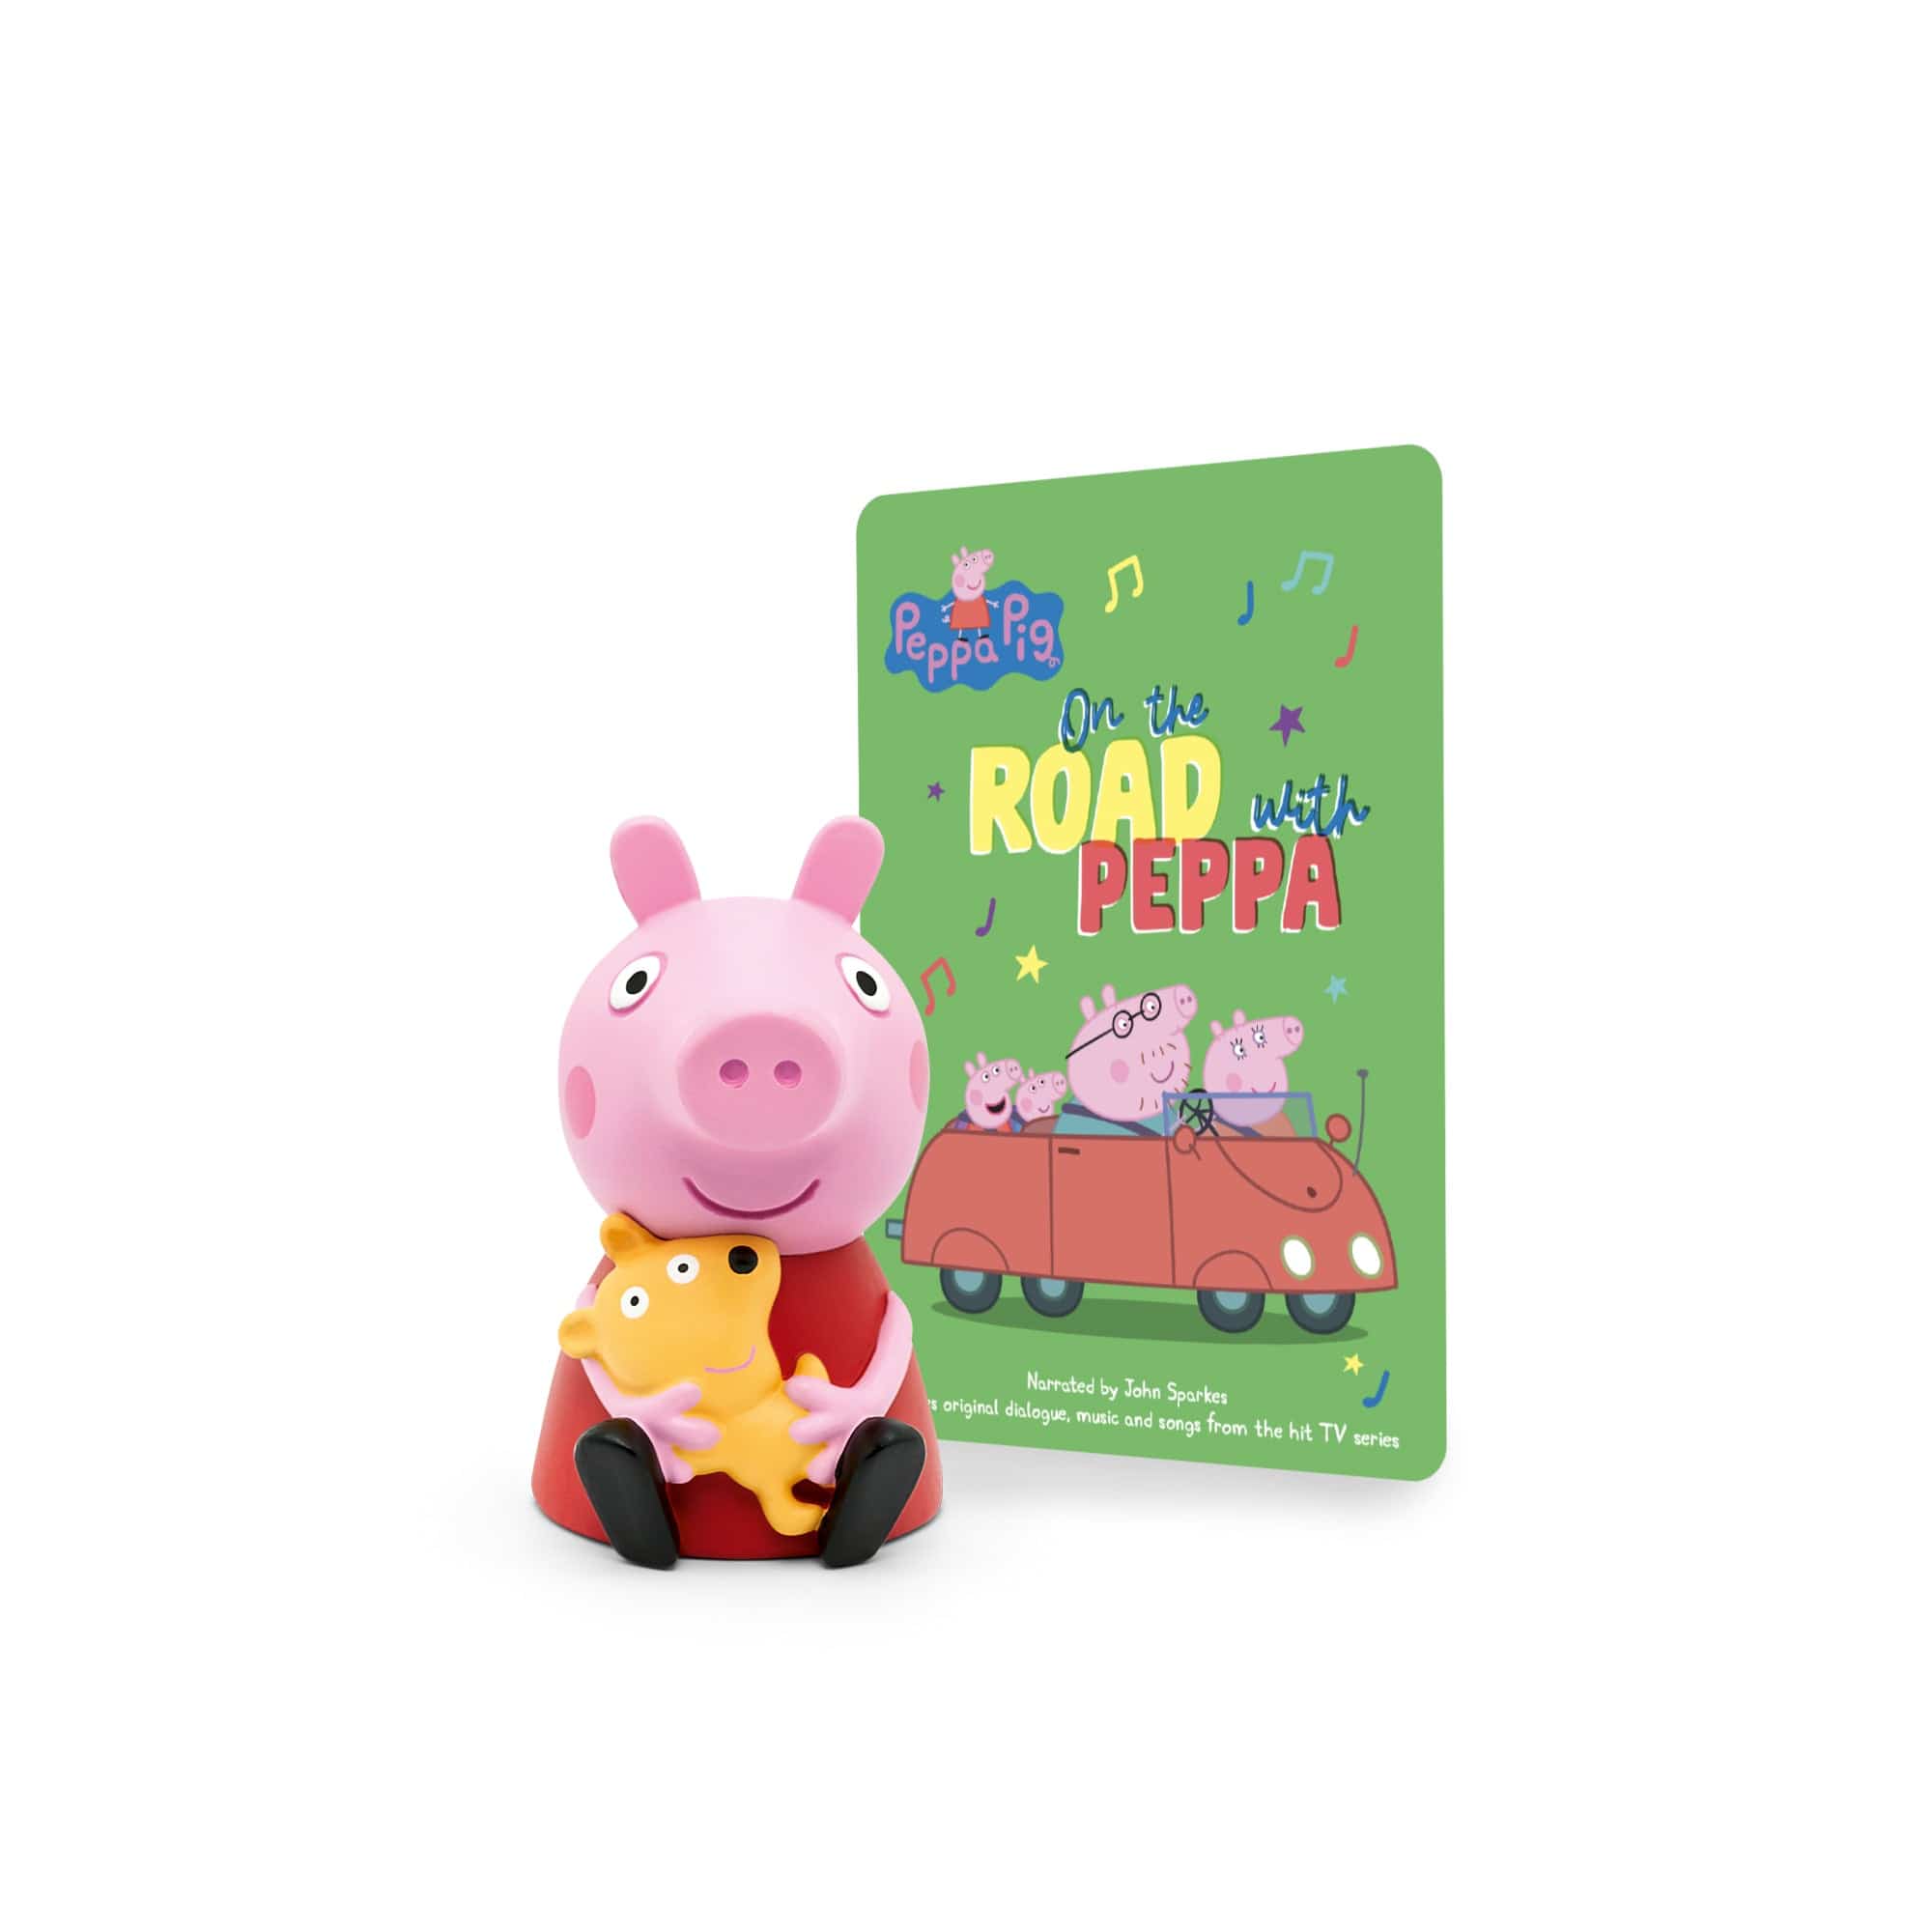 Tonies George Audio Play Character from Peppa Pig